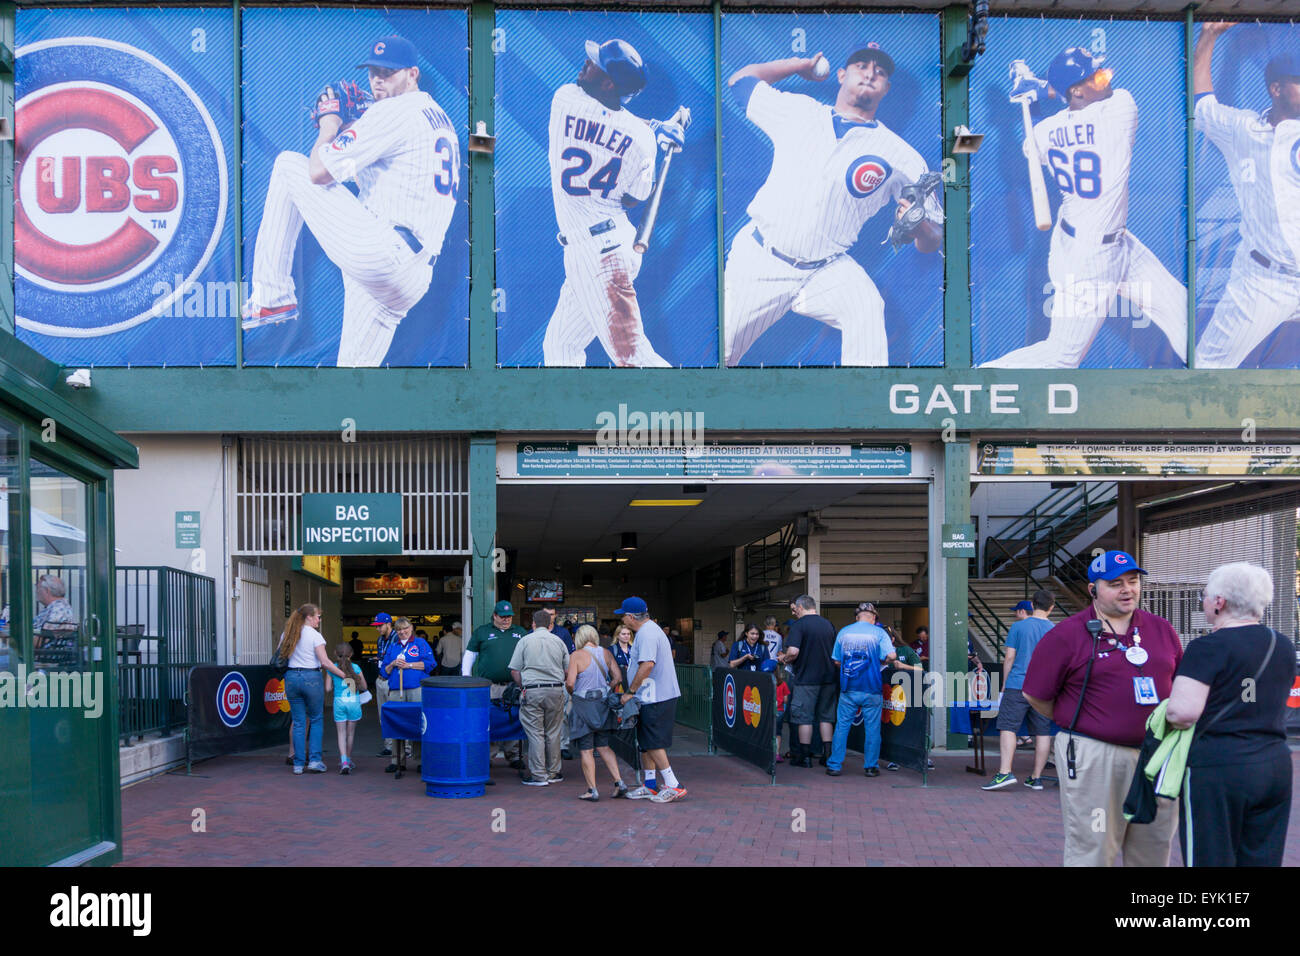 The entrance to Wrigley Field, the baseball ground of the Chicago Cubs. Stock Photo